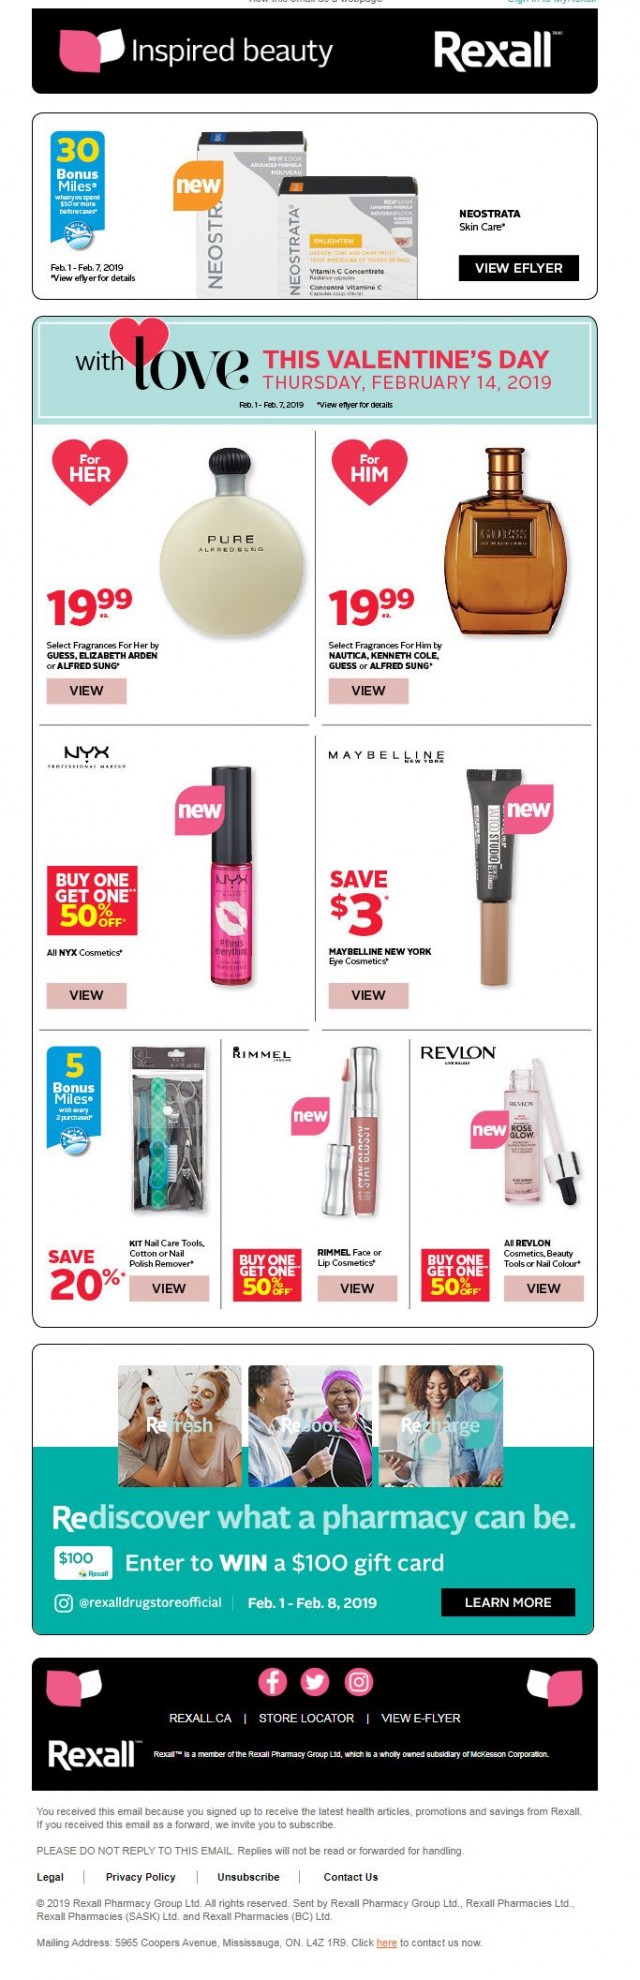 Coupon for: Rexall - Inspired beauty